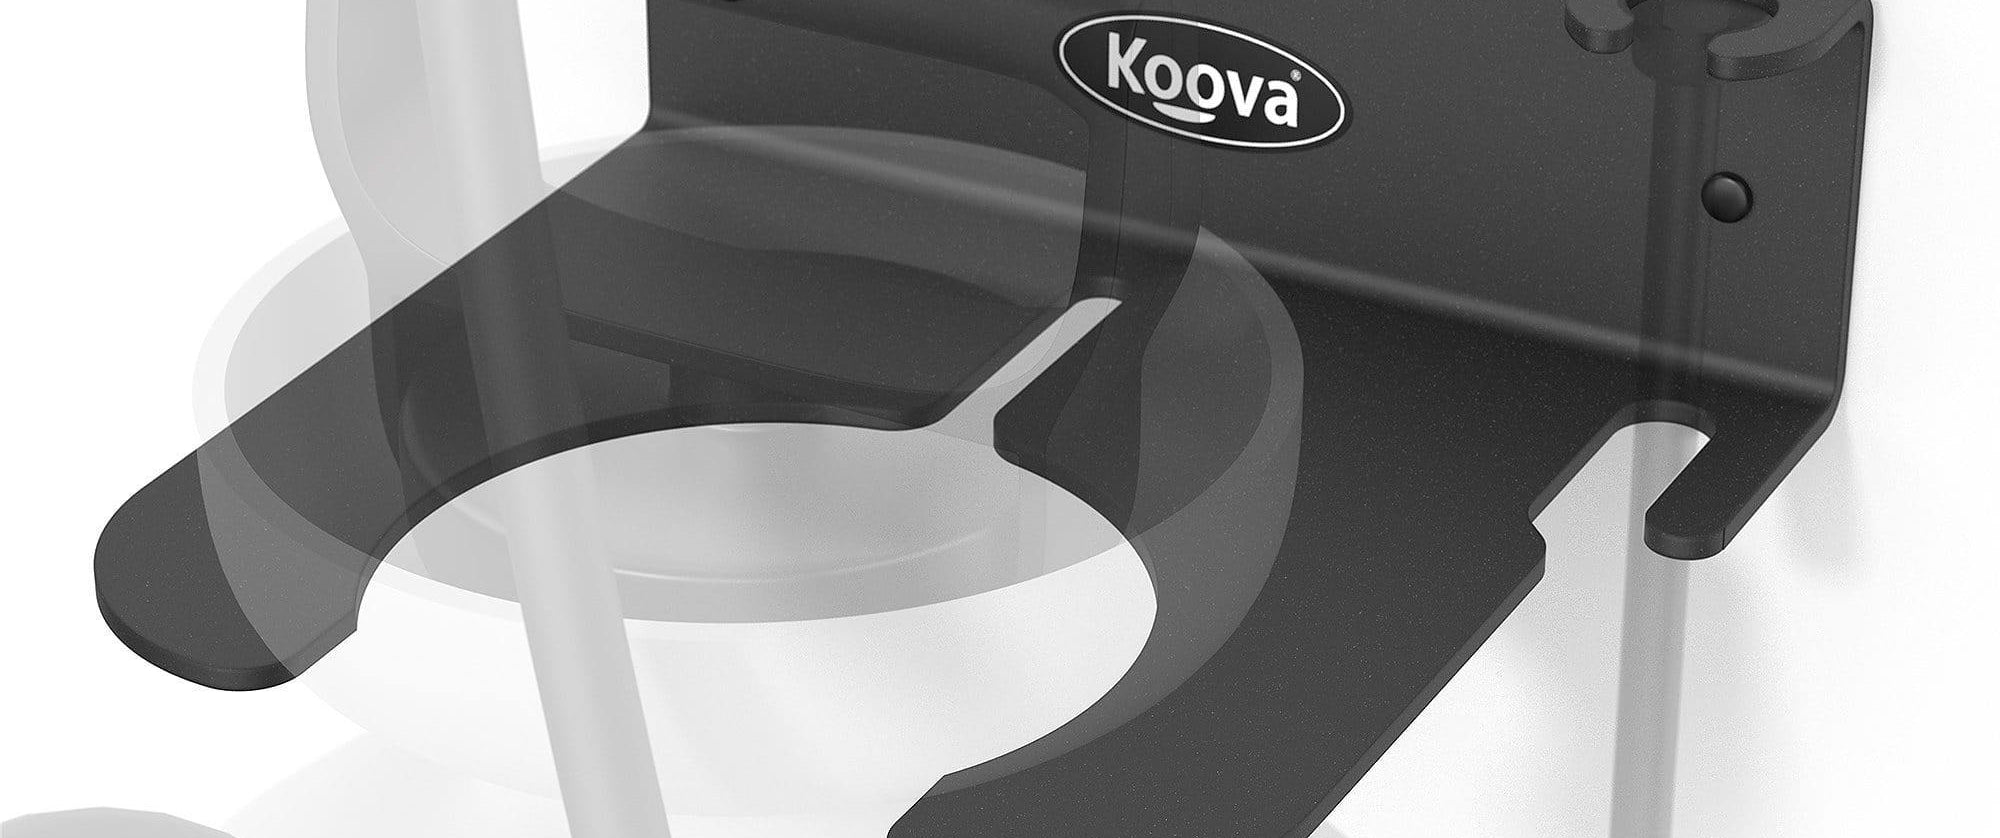 Koova wall mounted lawn and garden pressure sprayer mount holder for the garage or shed - ghost